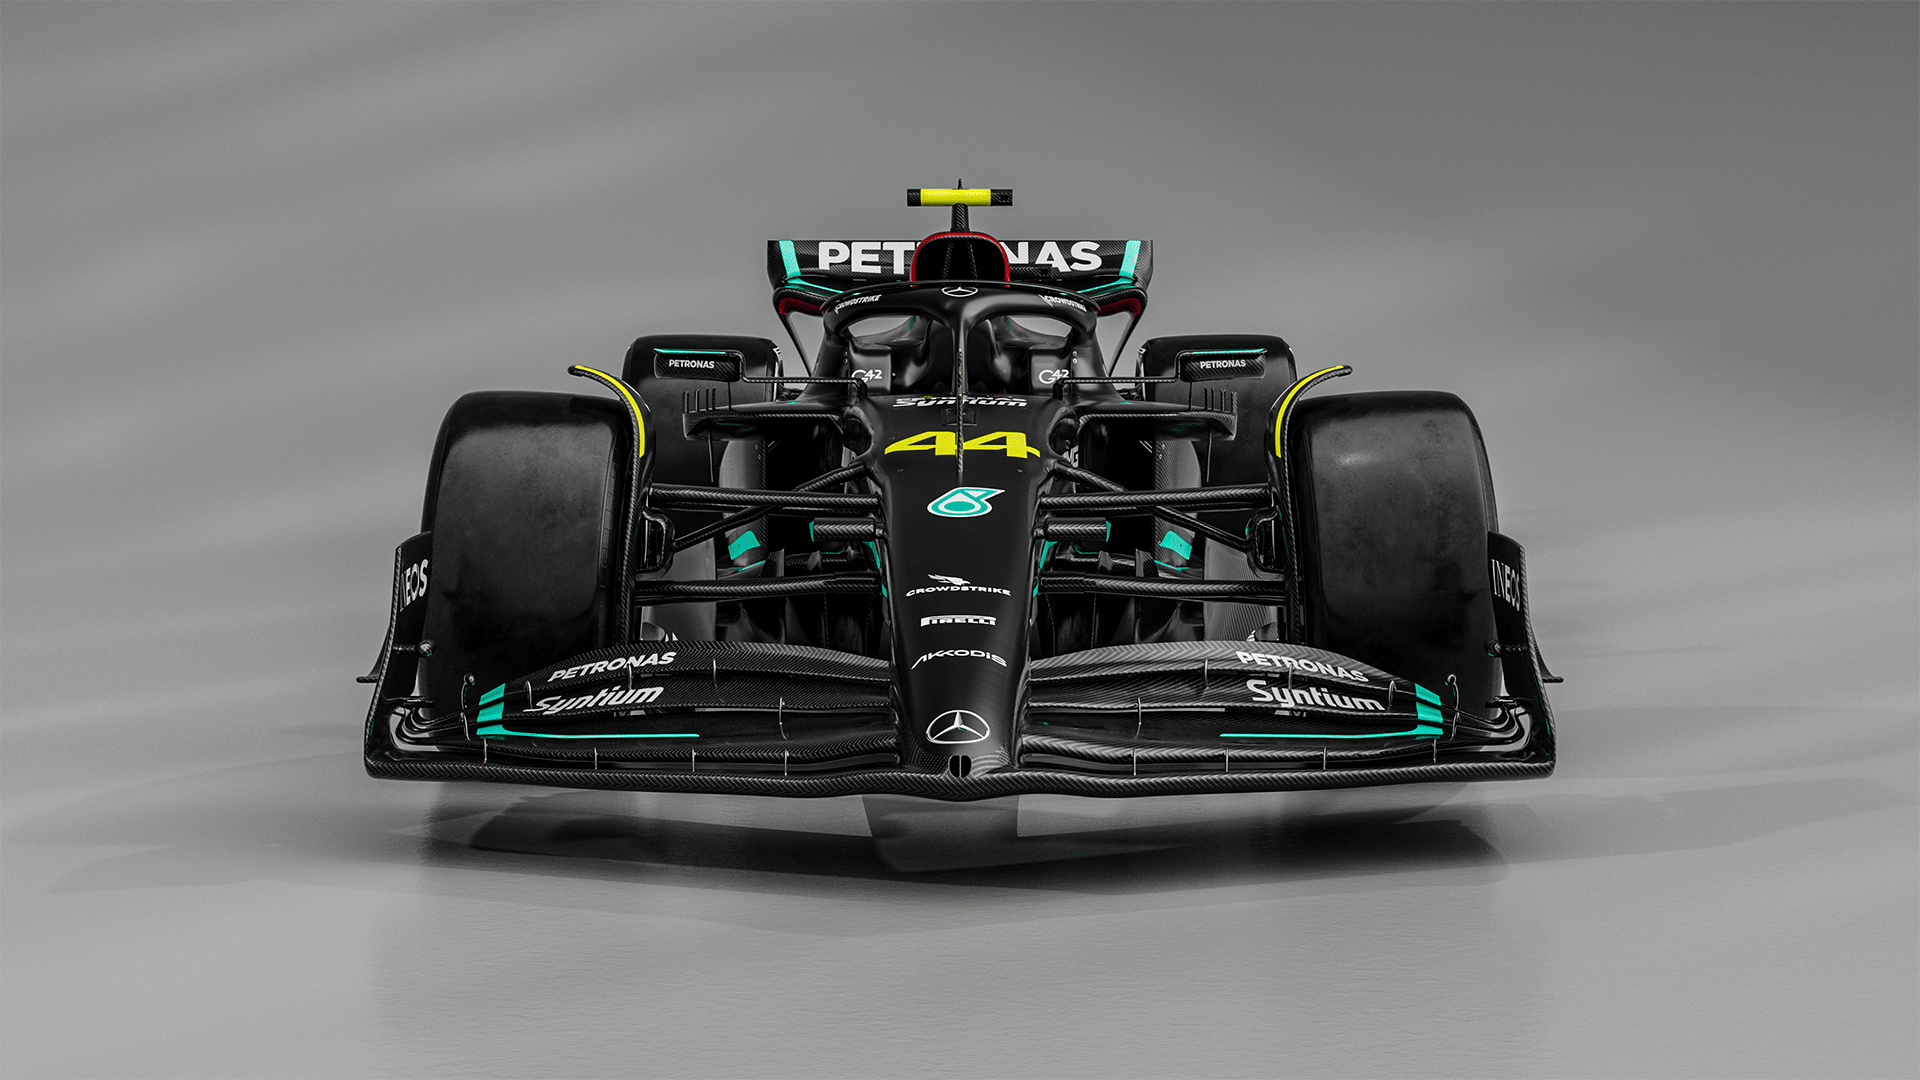 GALLERY: Take a closer look at the Mercedes W14 2023 F1 car and livery. Formula 1®